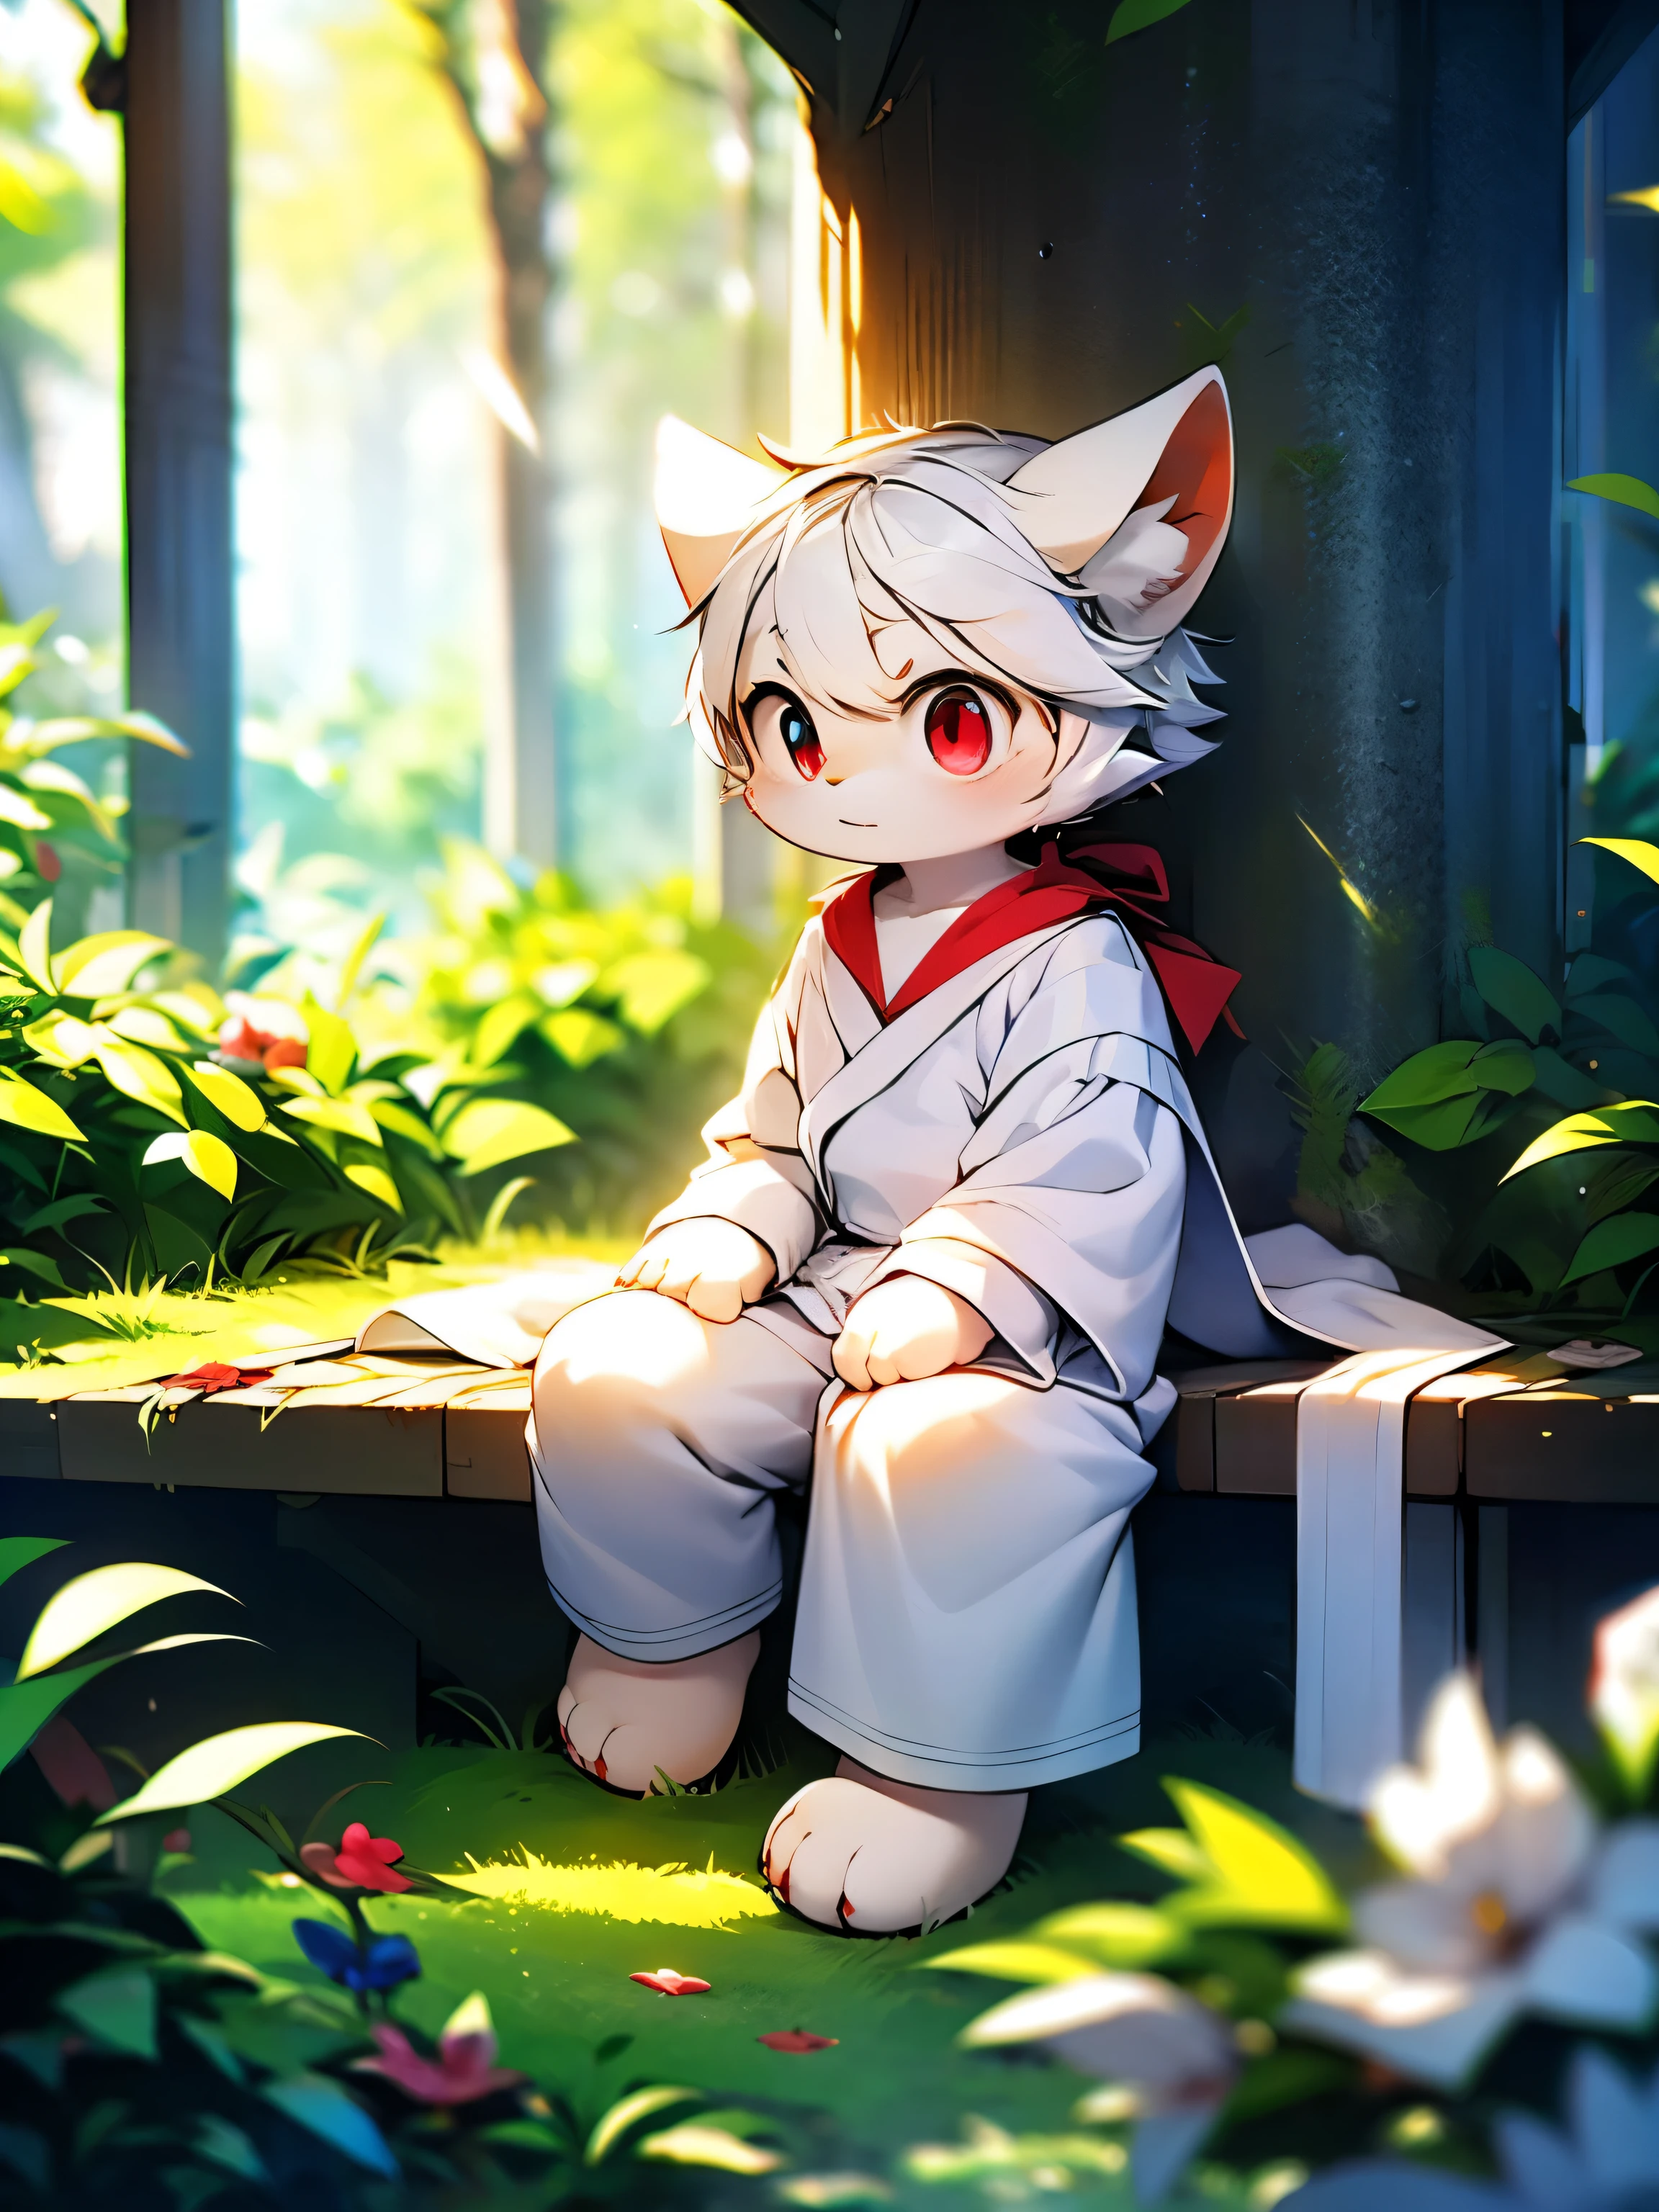 alone，mage，male，adult，white wolf，Light blue and white hair，red eyes，white robe，Gold diamond pattern，White trousers，white plush paws，serious expression，White stuffed tail，mystery，powerful，bright and lively eyes（A masterpiece）（high quality）（clear structure）（Extremely detailed background）（extremelydetailedcharacter）